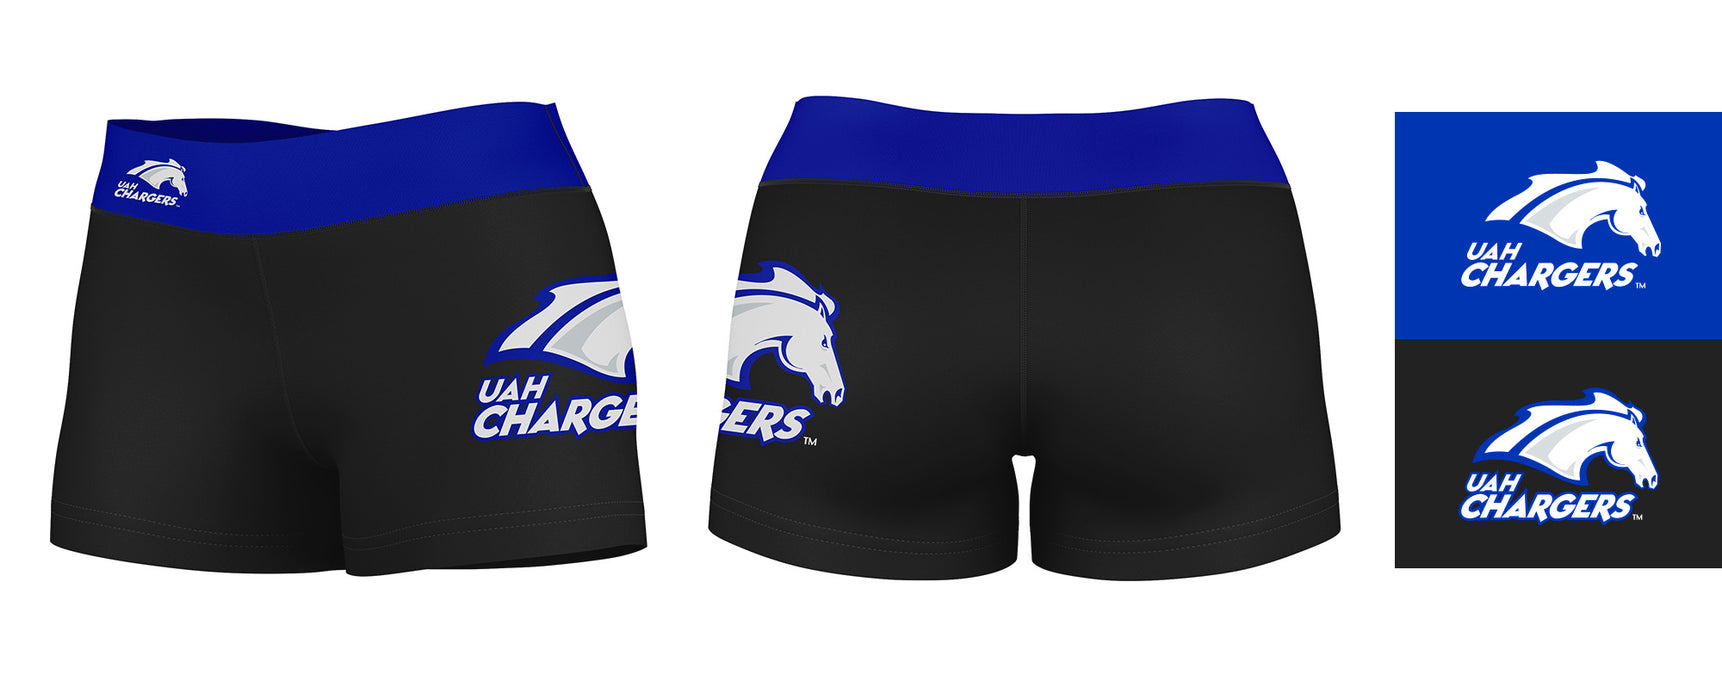 UAH Chargers Vive La Fete Game Day Logo on Thigh and Waistband Black & Blue Women Yoga Booty Workout Shorts 3.75 Inseam - Vive La Fête - Online Apparel Store